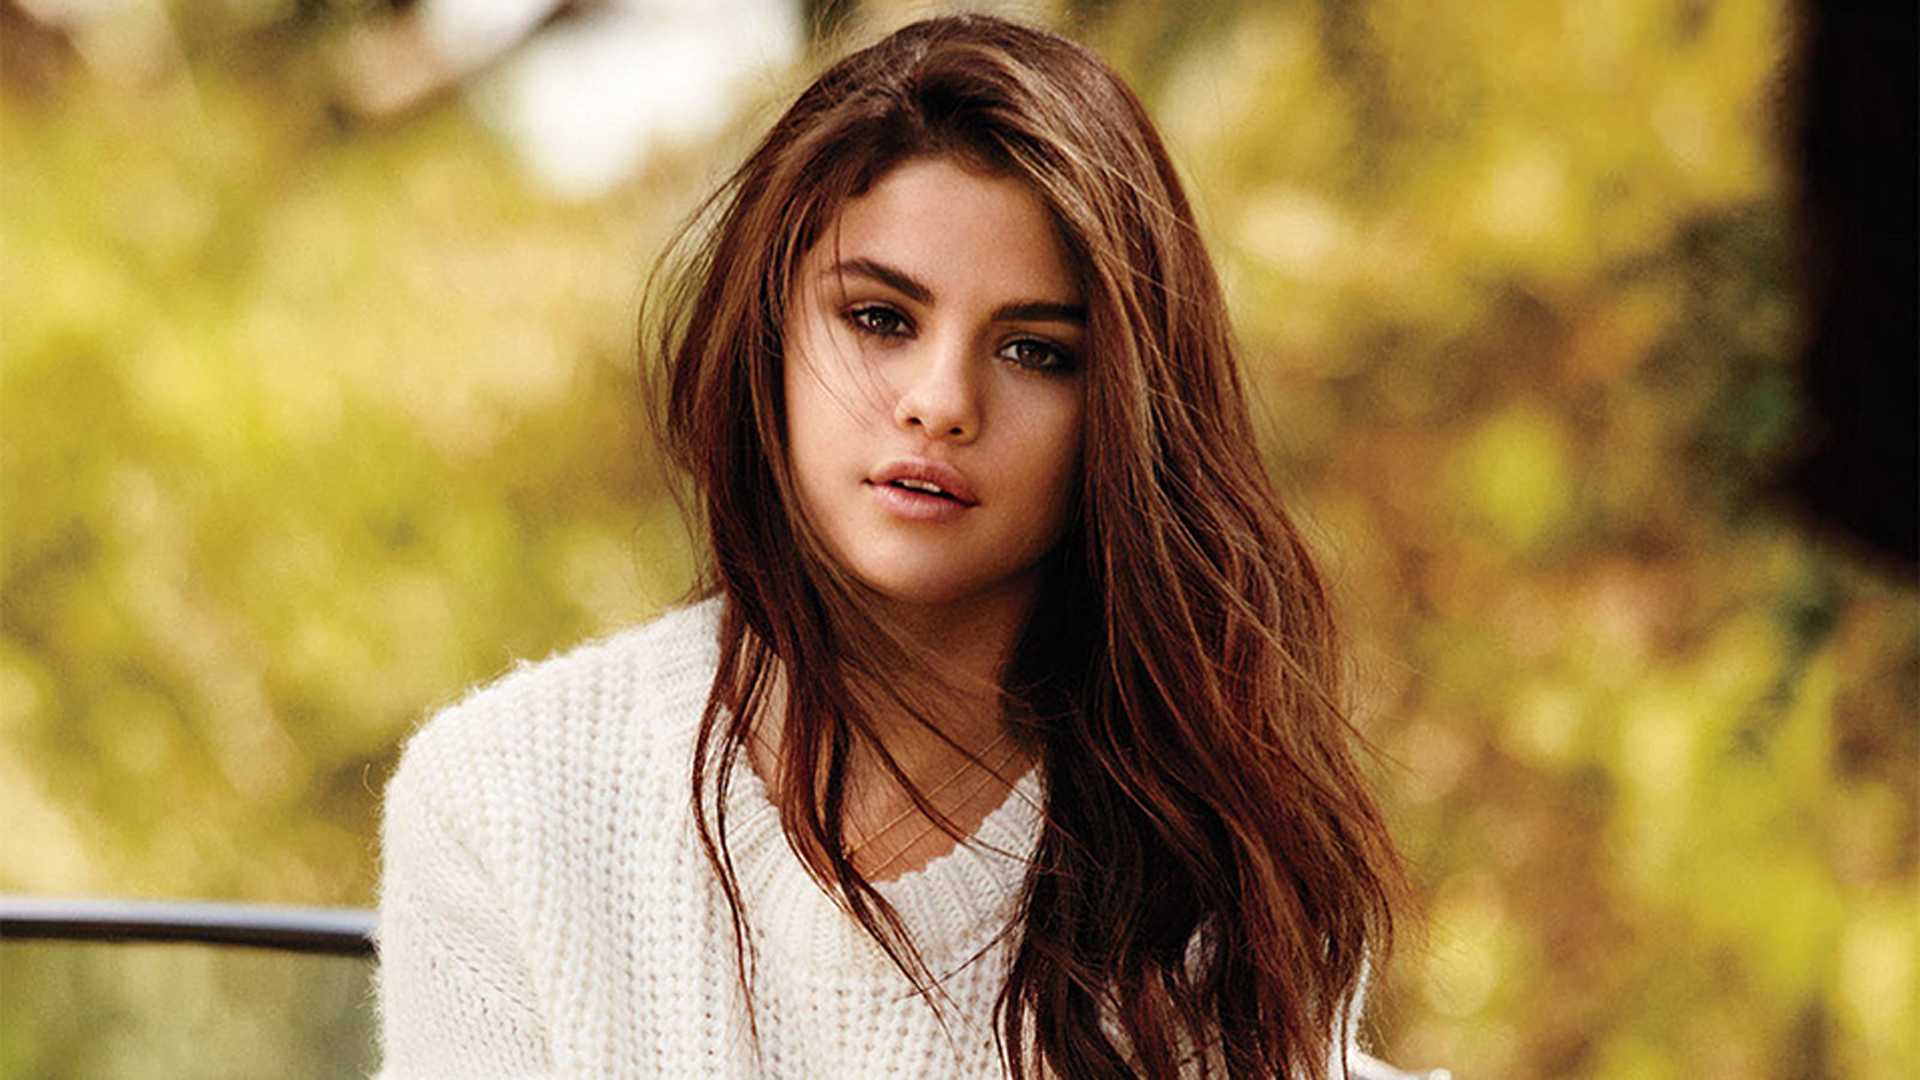 Selena Gomez HD Wallpapers  Latest Selena Gomez Wallpapers HD Free  Download 1080p to 2K  FilmiBeat